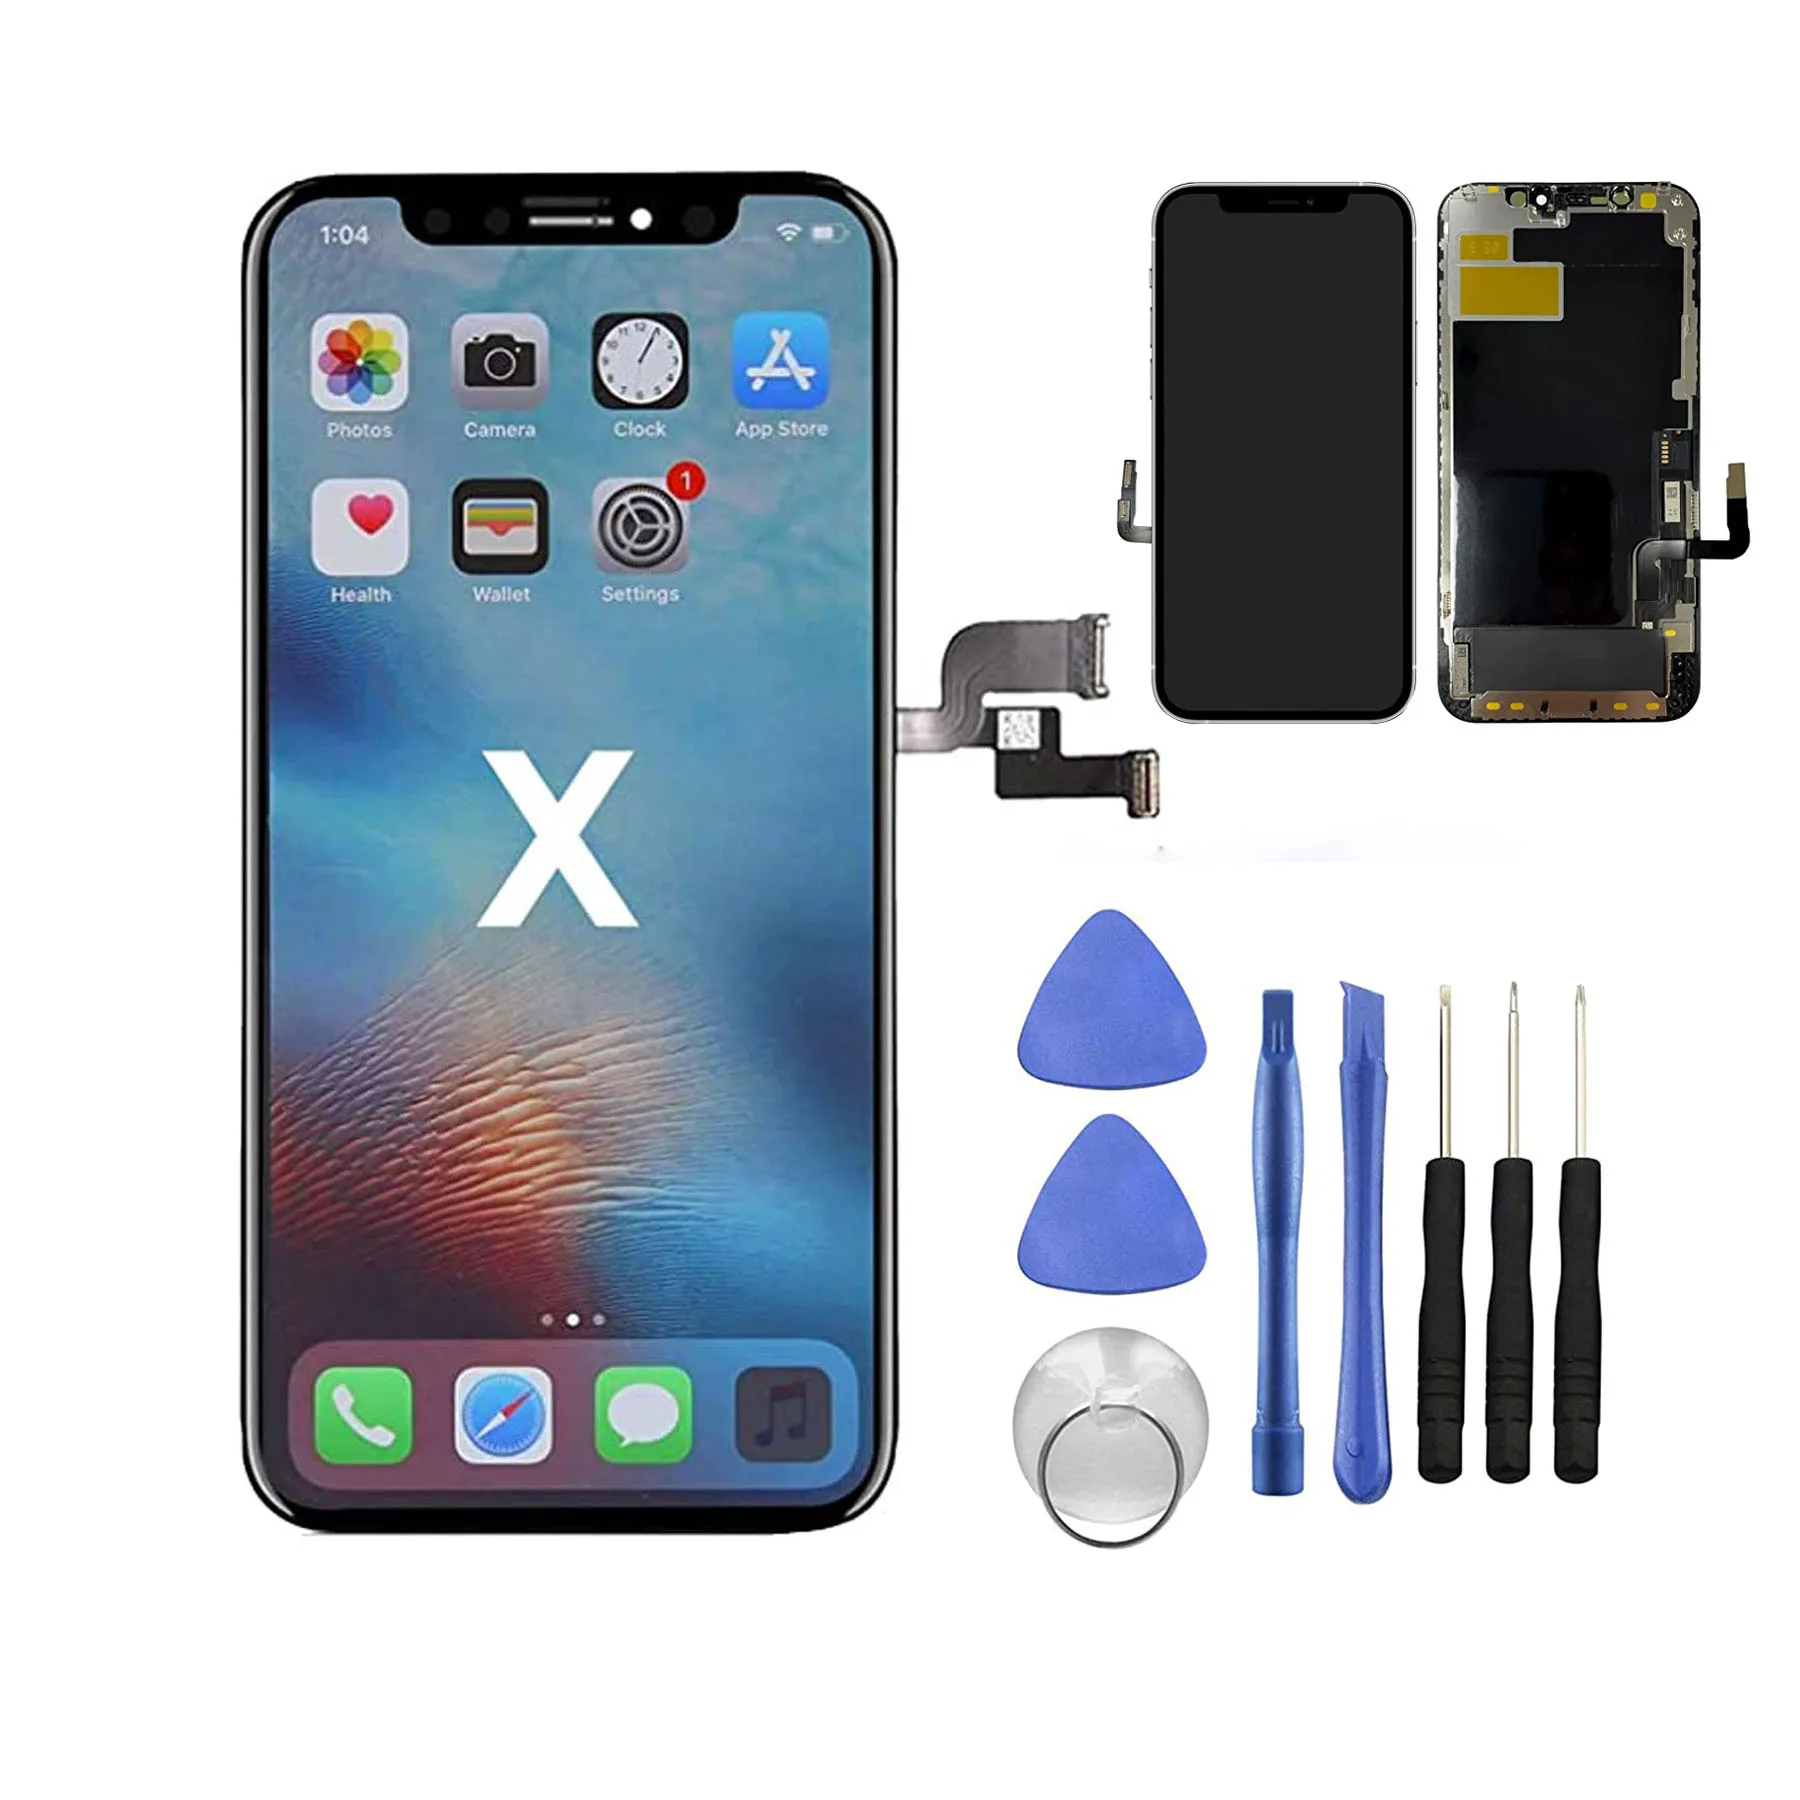 OLED Screen For iPhone X XS XR 11 12 LCD Display for iPhone 11 Pro XS Max Touch Screen Digitizer Assembly Replacement With Tools